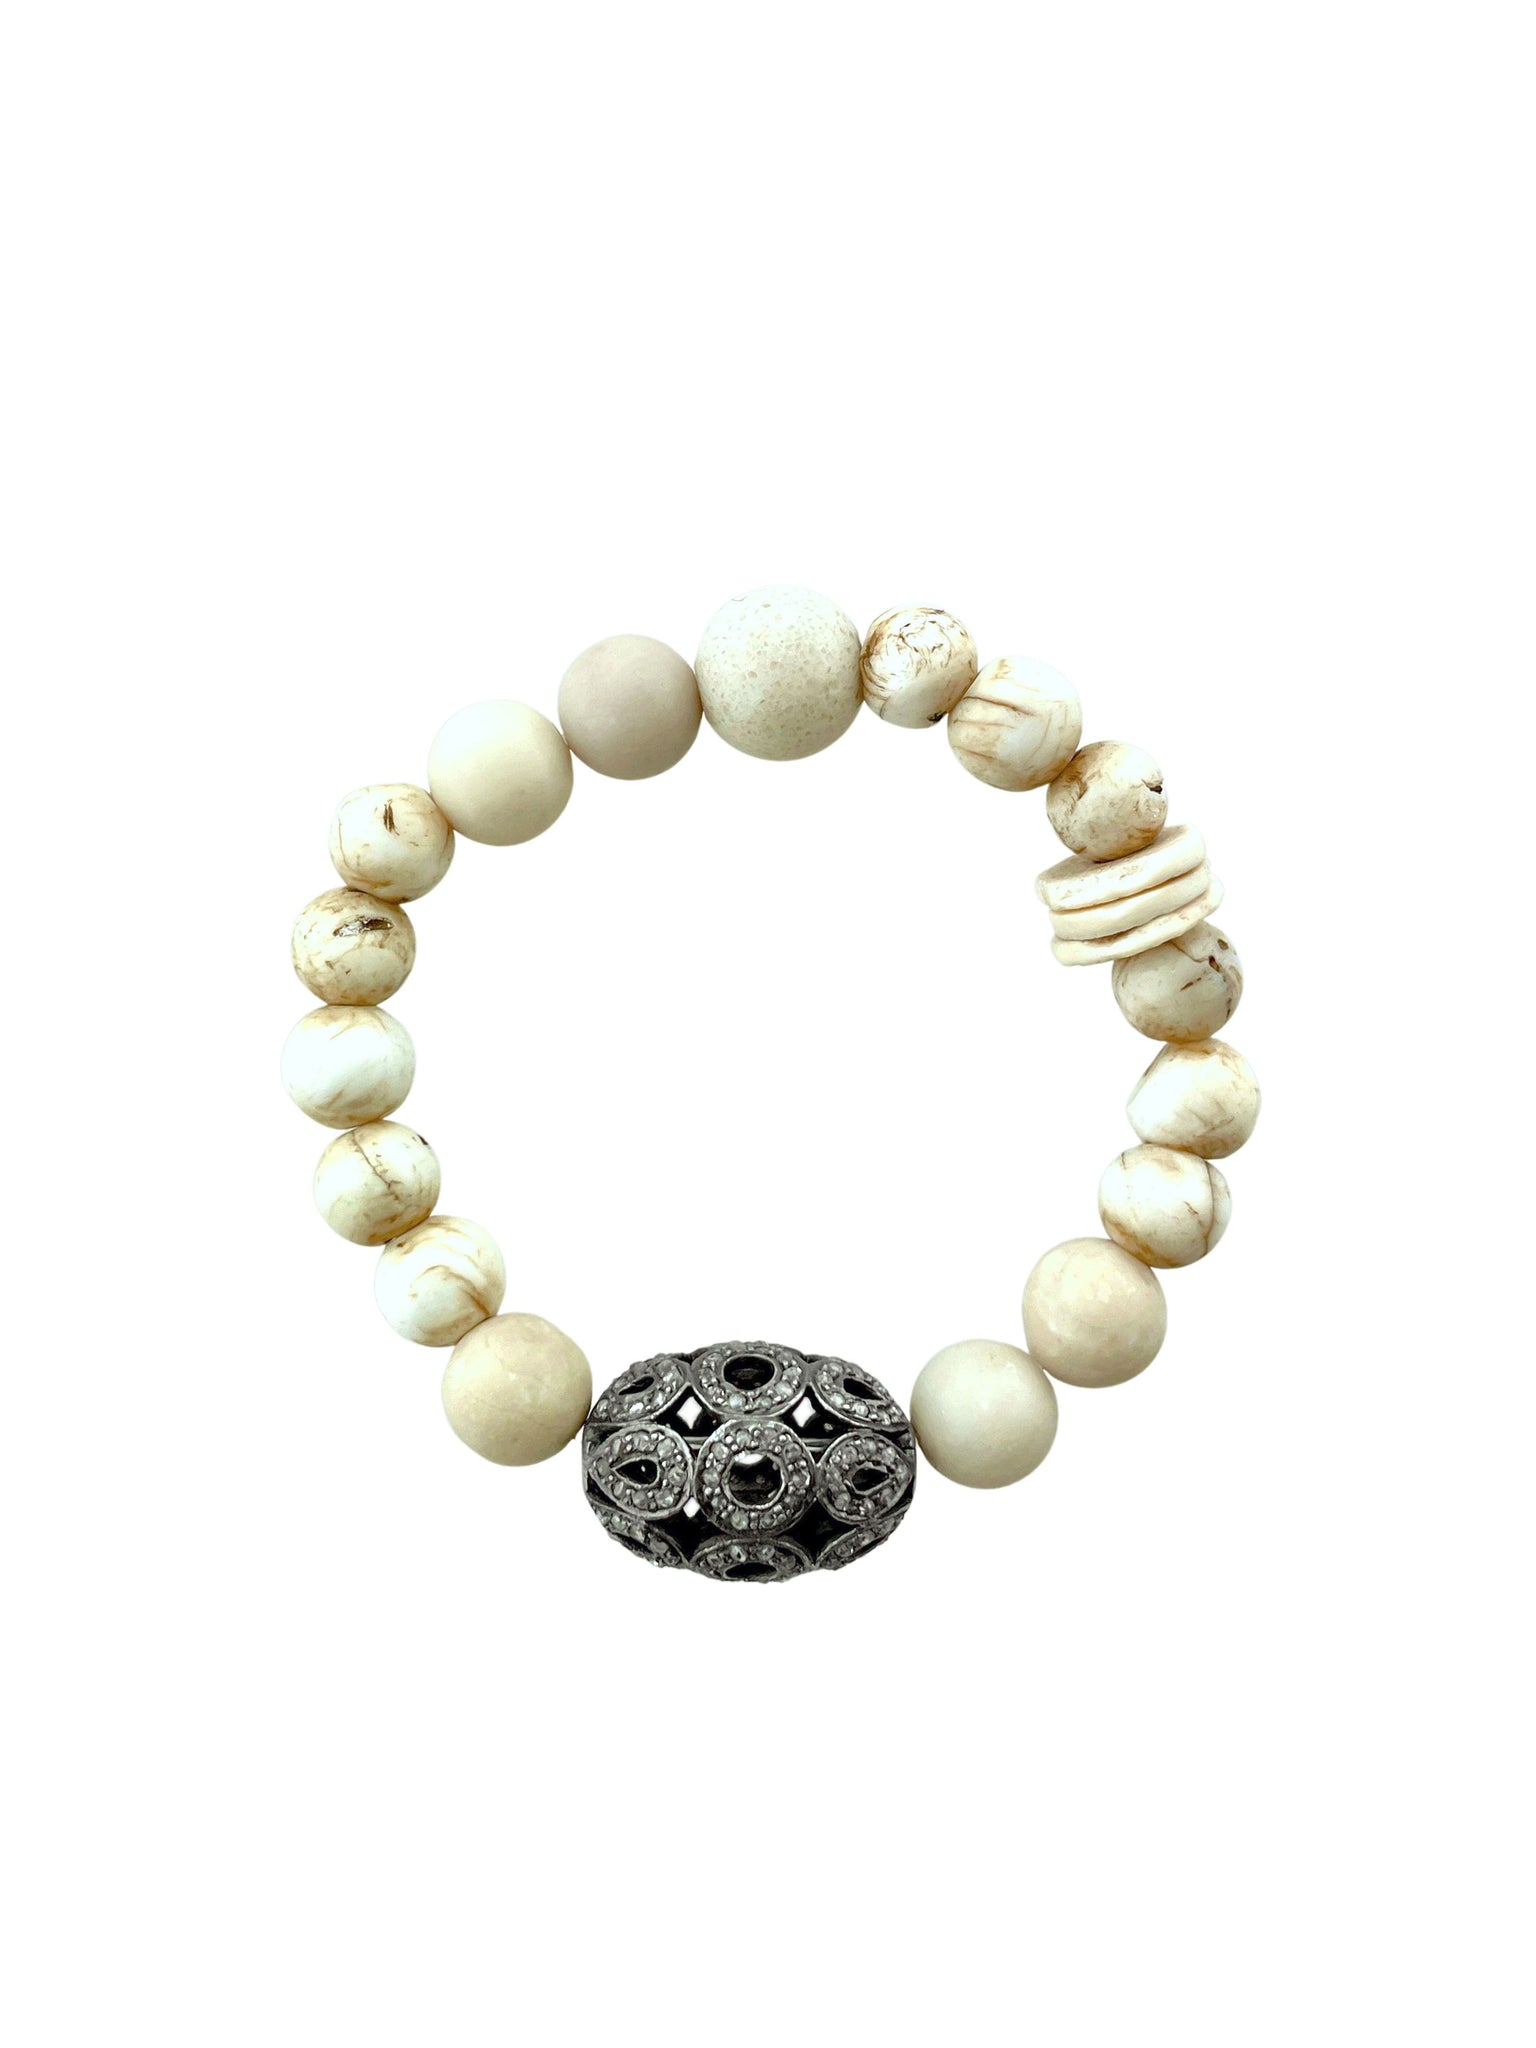 Extra Large Pave Diamond Bead on Shell and Coral Beads